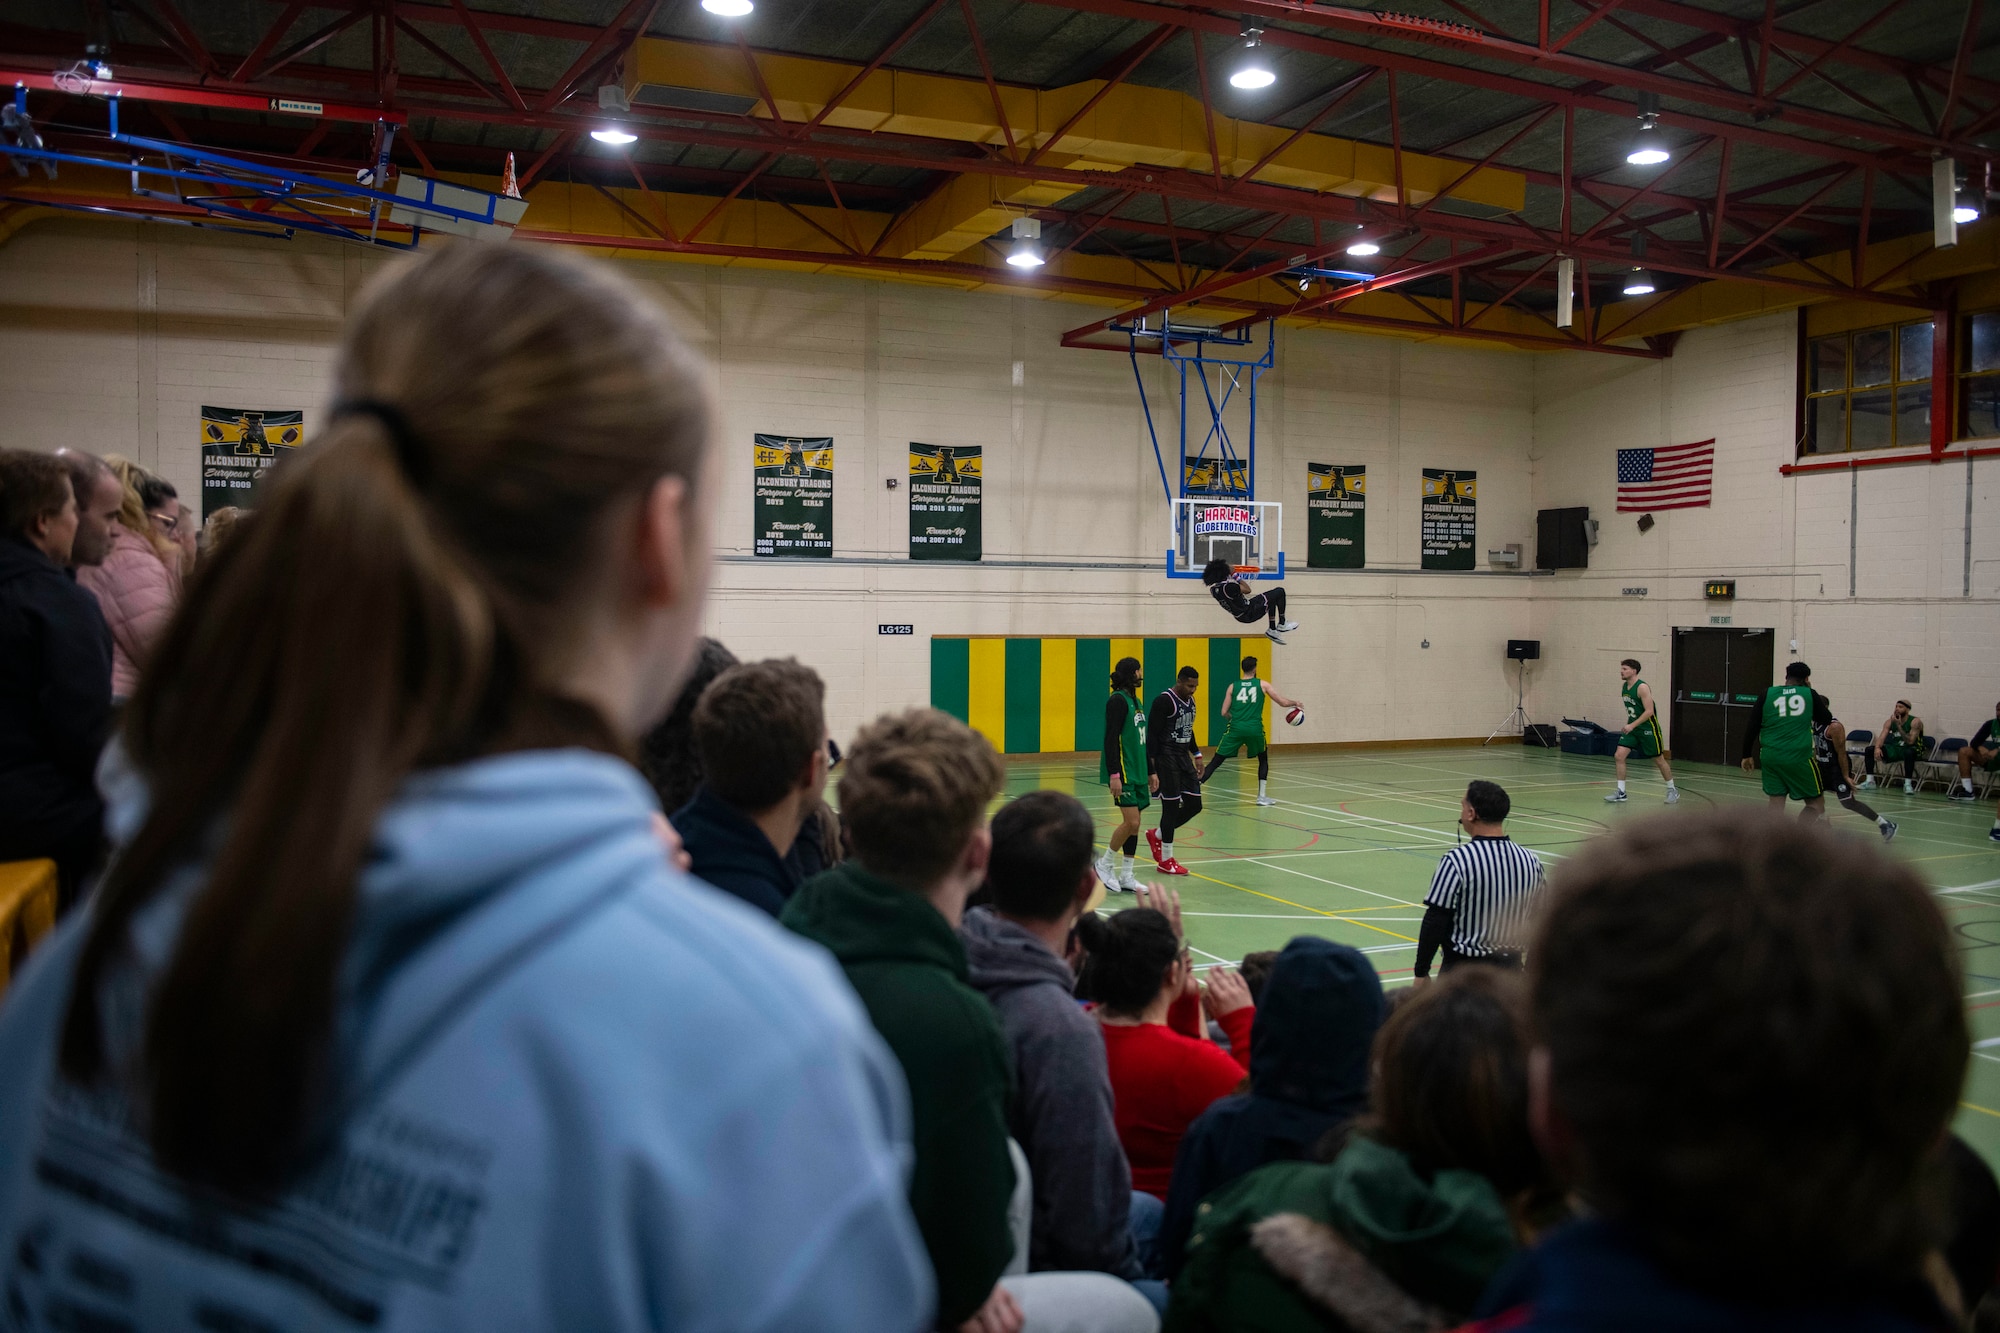 The audience watches as a member of the Harlem Globetrotters dunks at RAF Alconbury